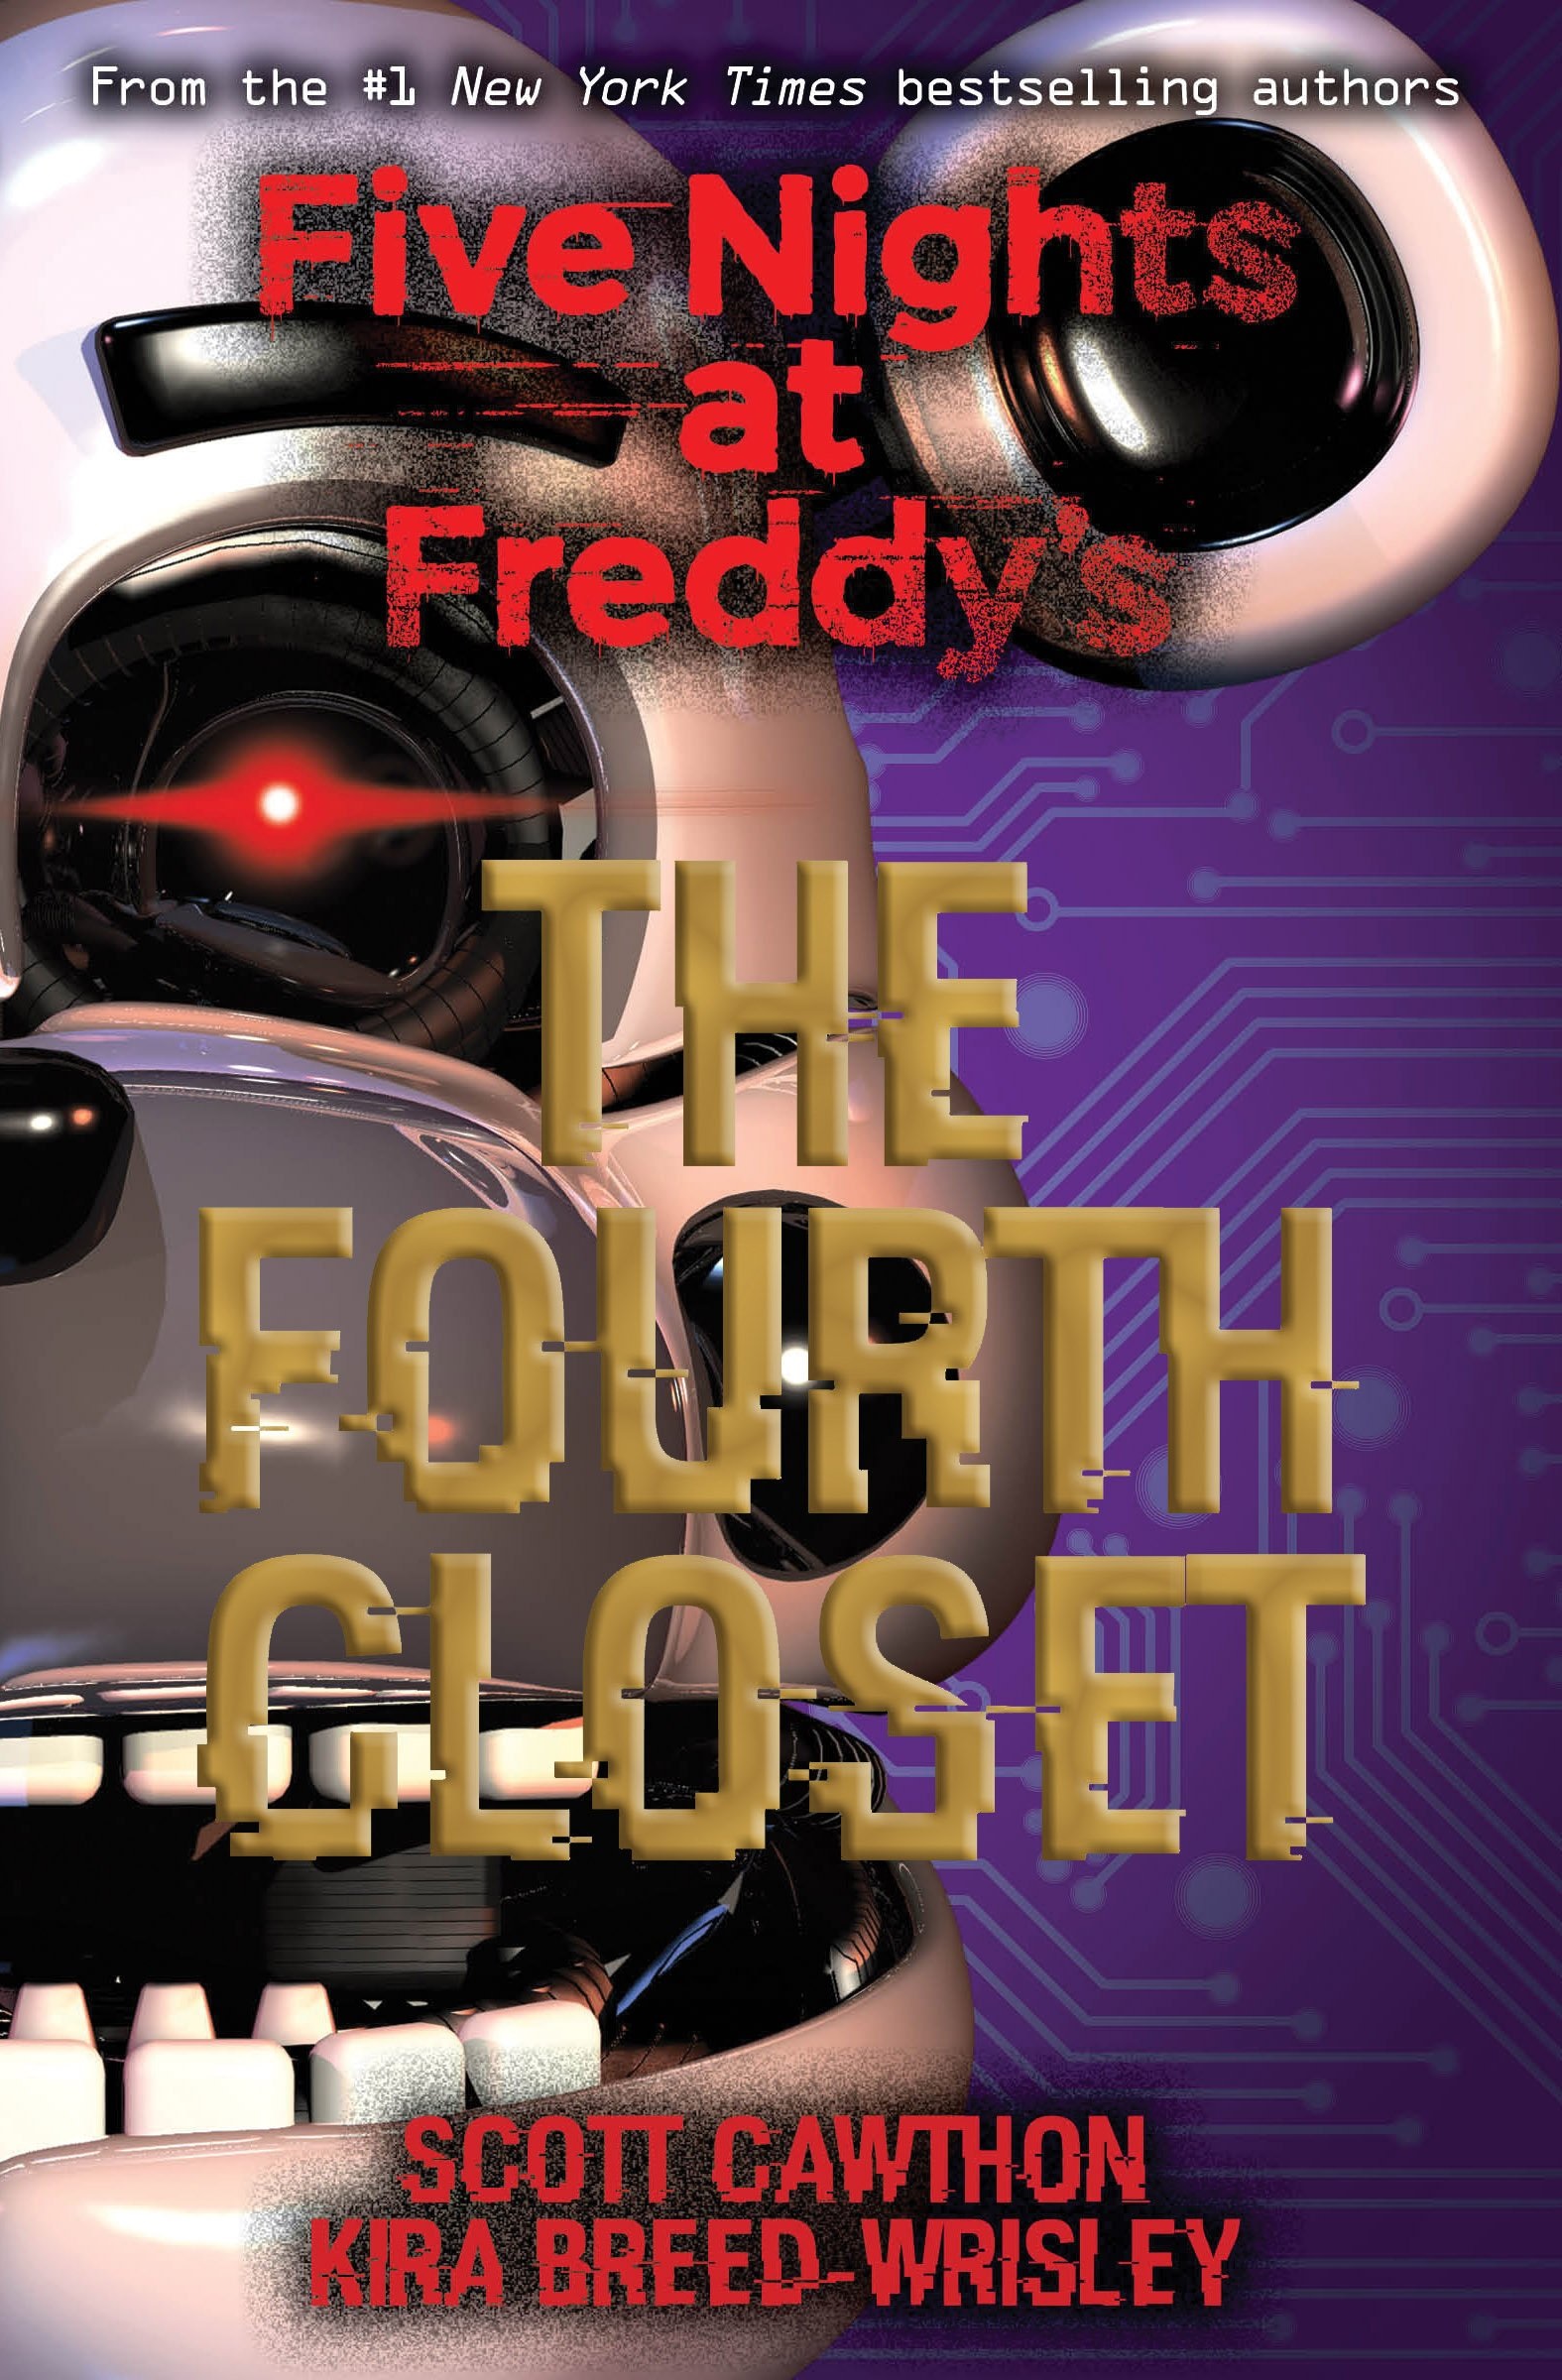 Five Nights at Freddy's. The Fourth Closet